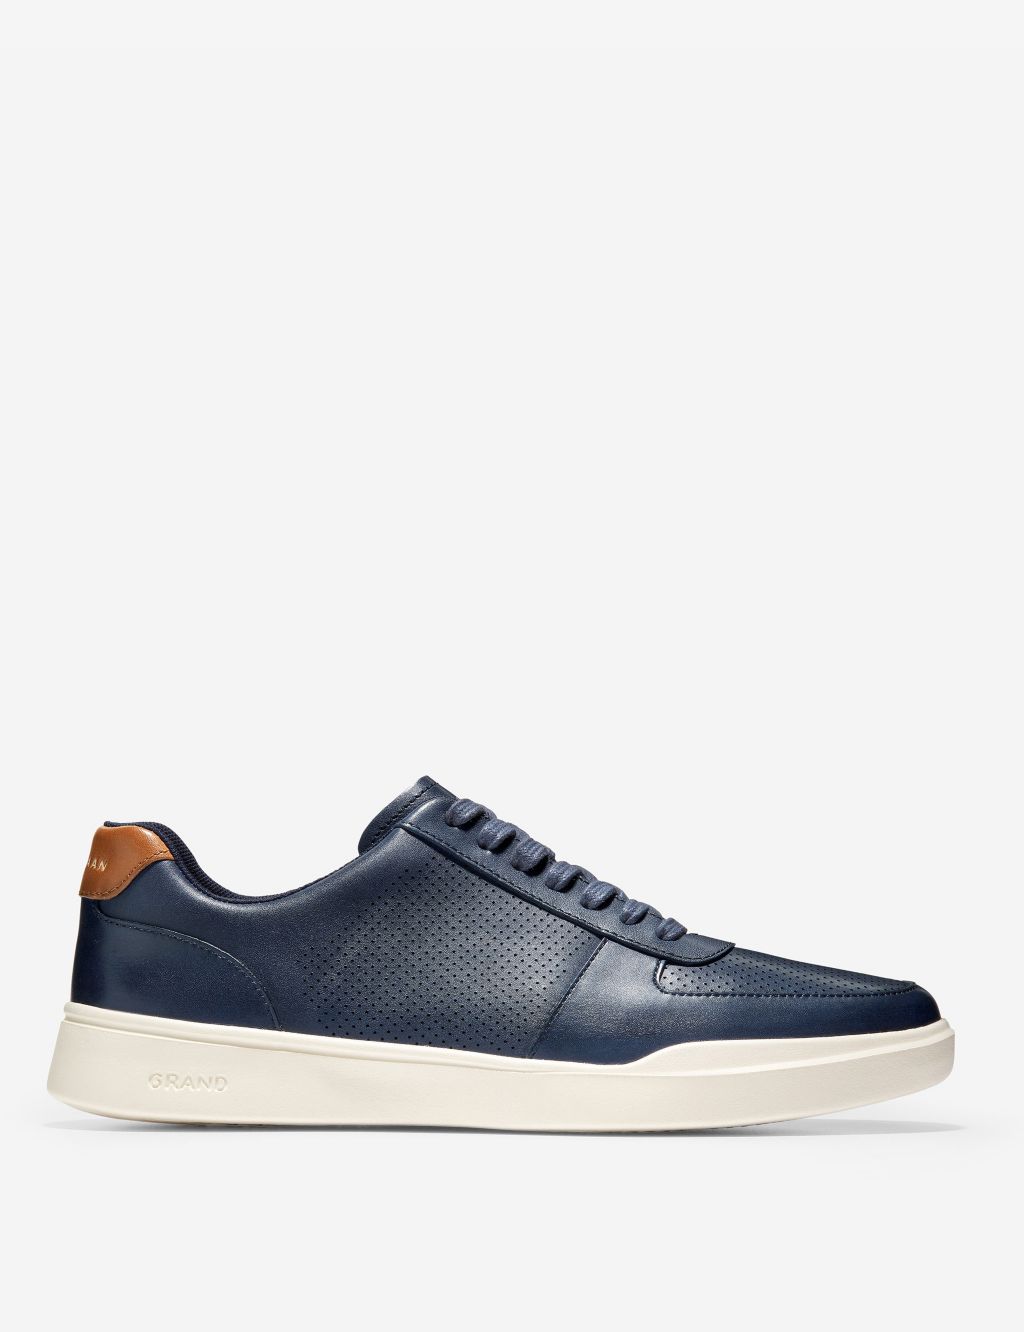 Grand Crosscourt Modern Wide Fit Trainers image 1